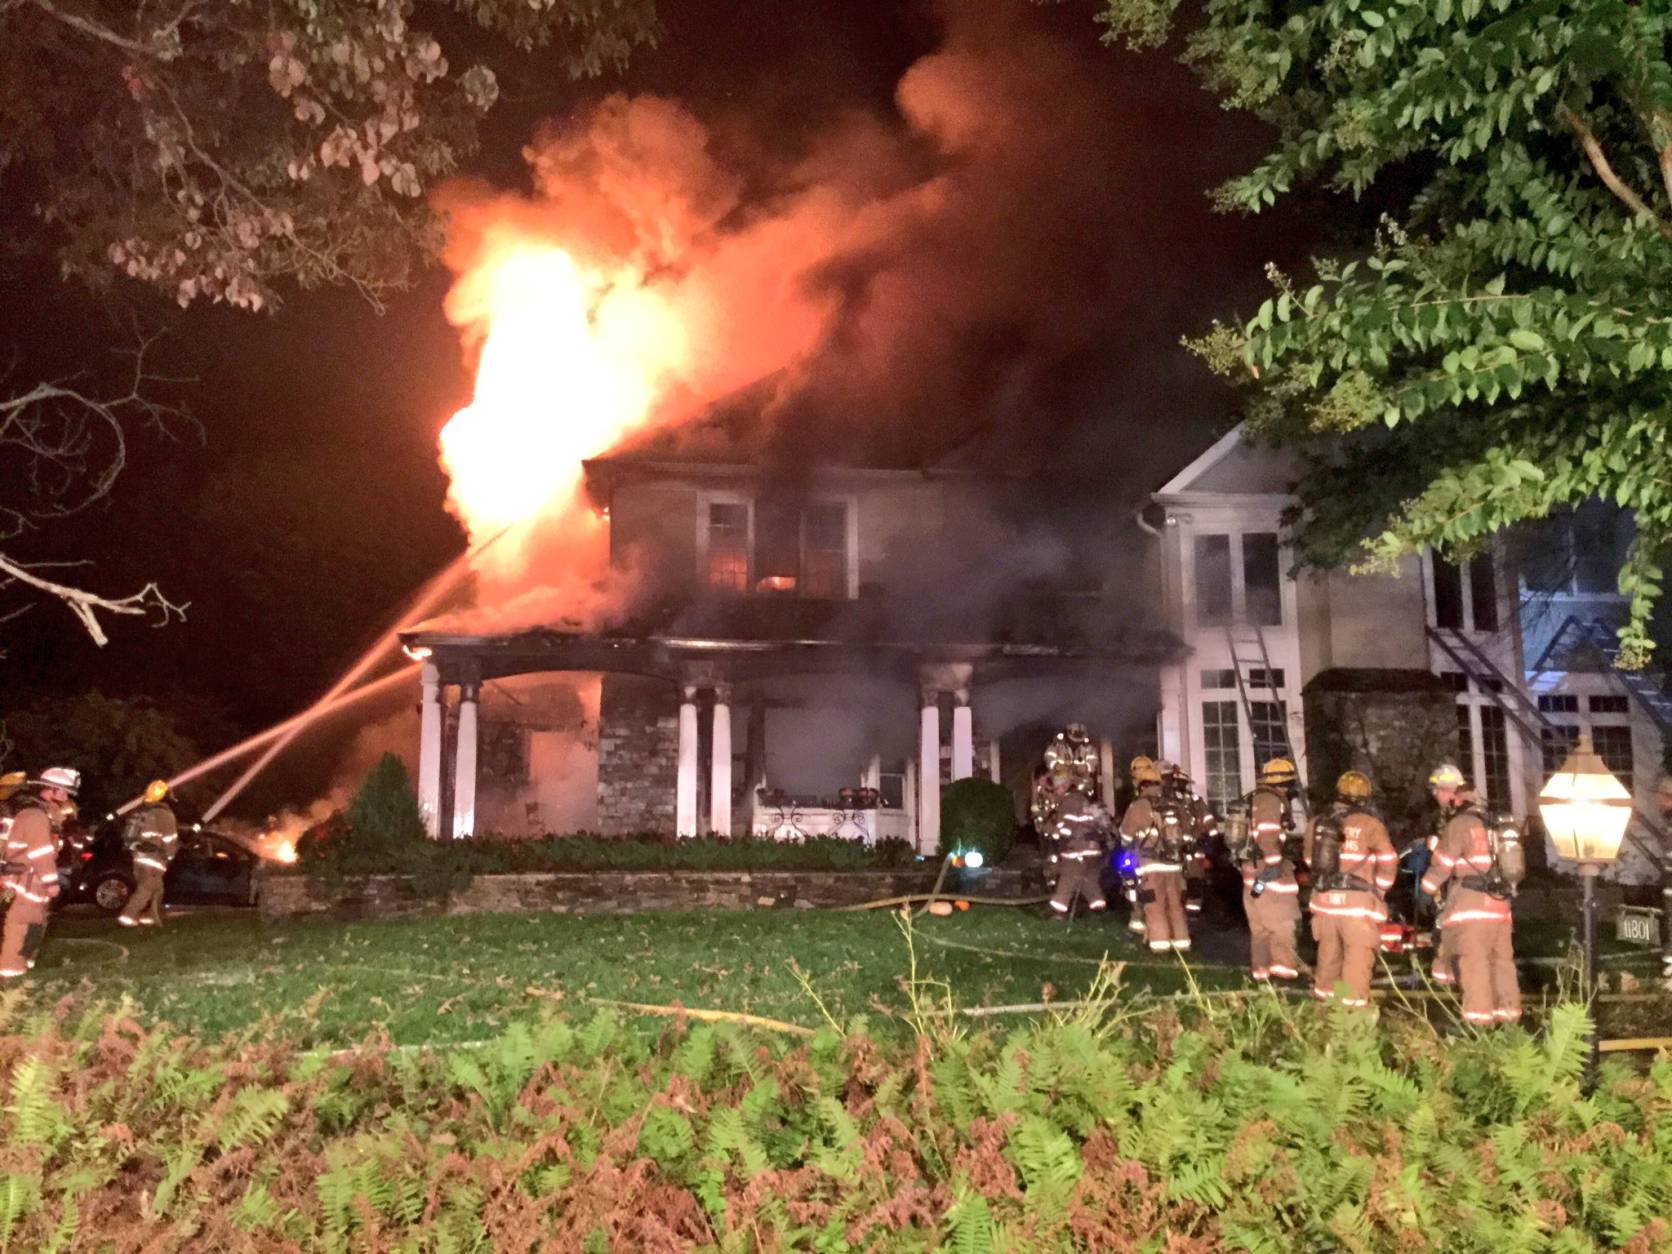 A fire caused about $1.5 million in damages to a house and cars in Bethesda Sunday night. (Montgomery County Fire and Rescue/Pete Piringer)